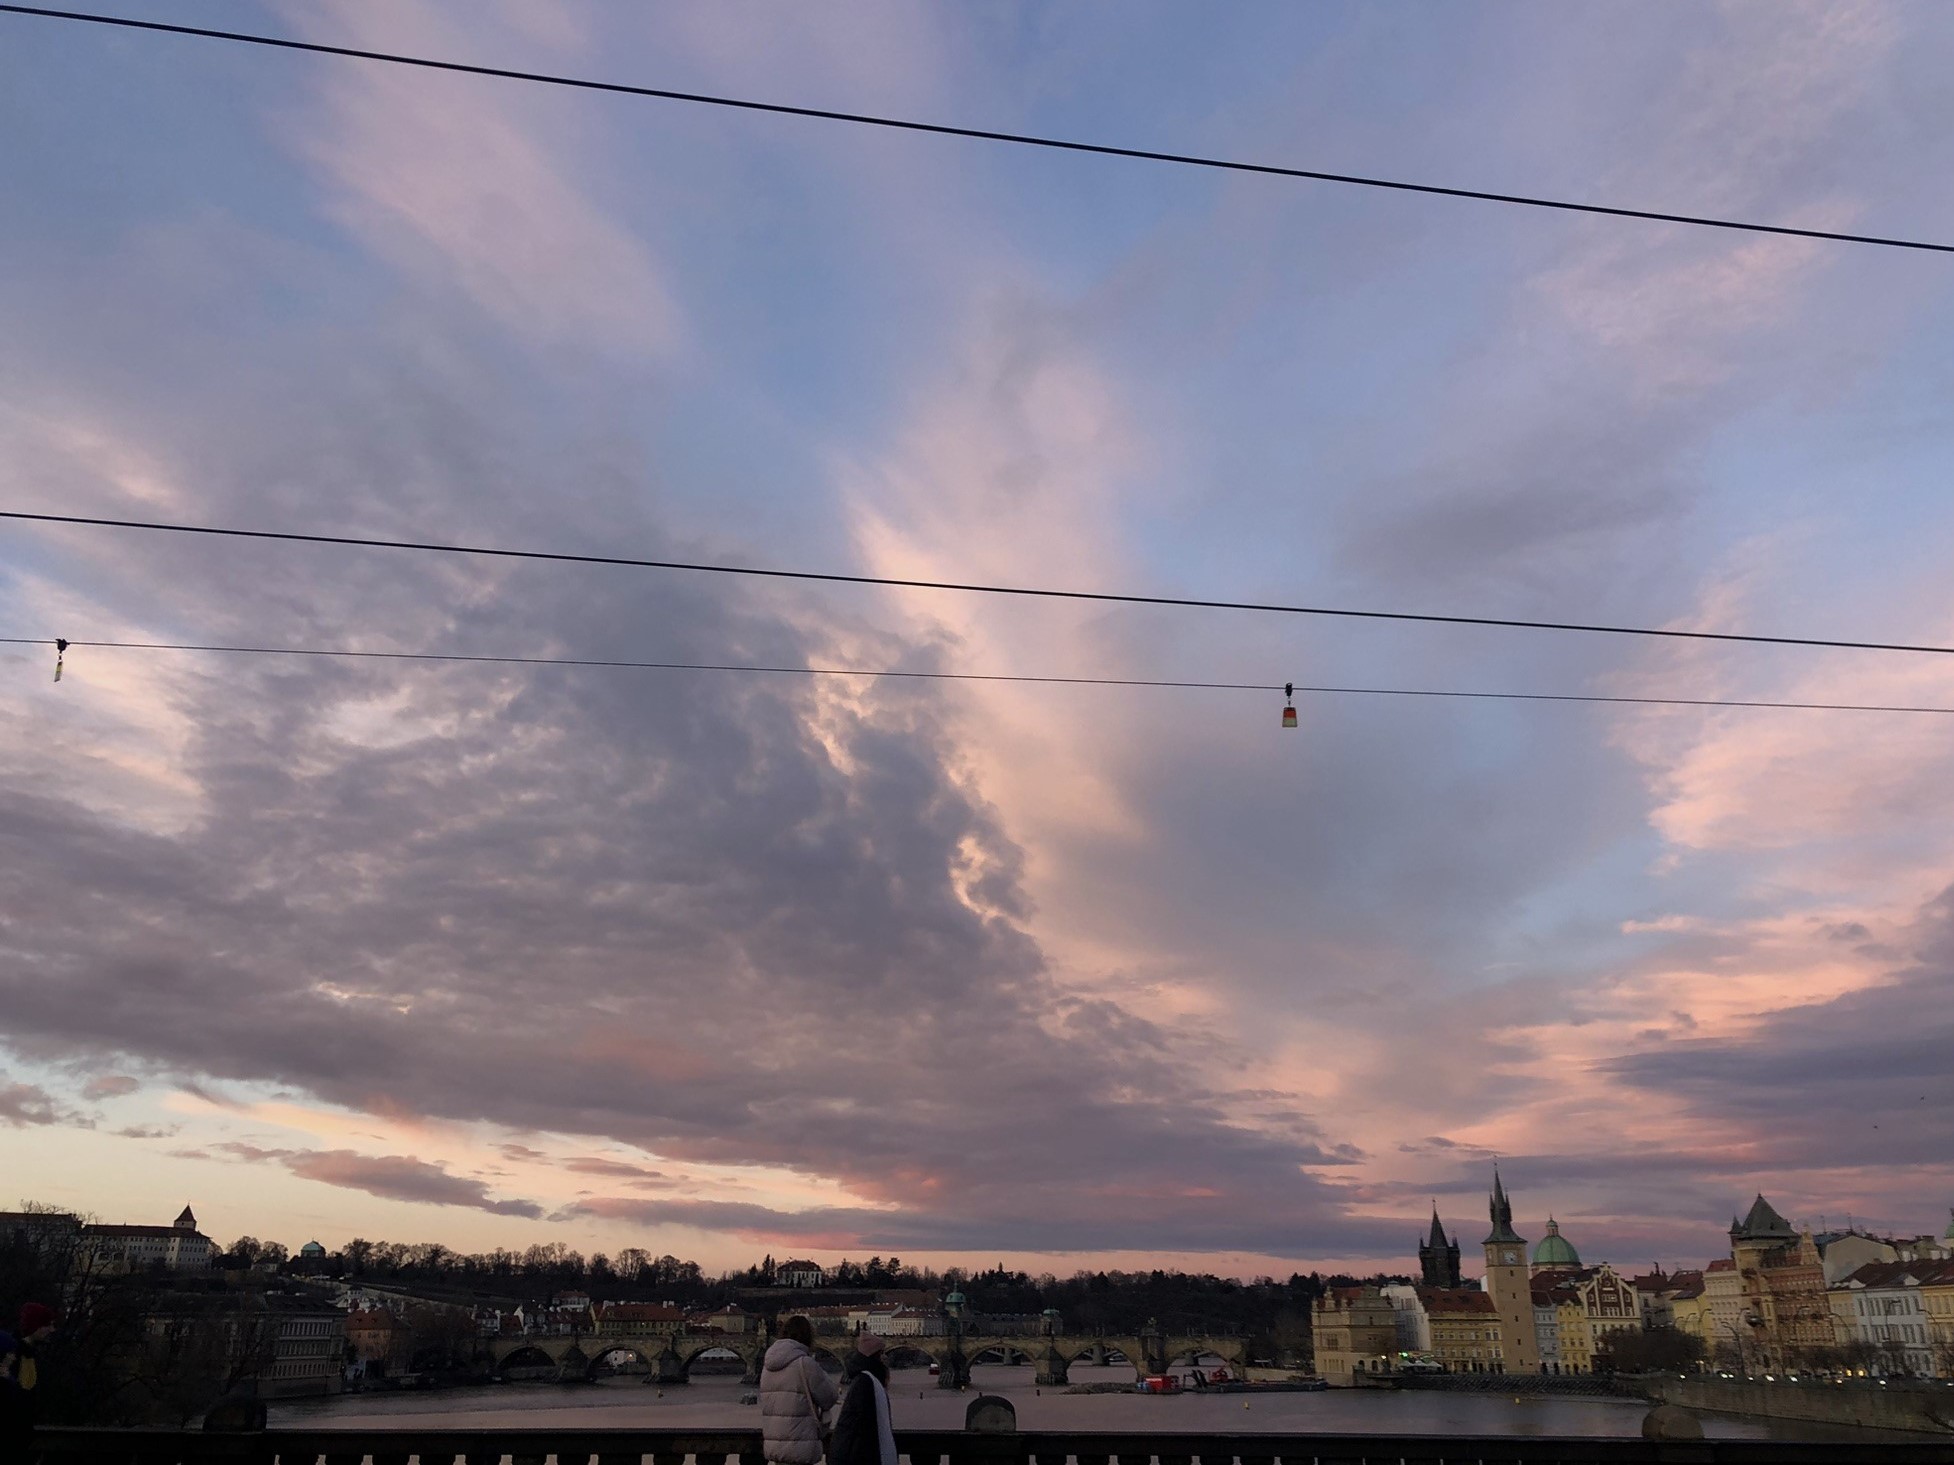 The amazing sunsets in Prague